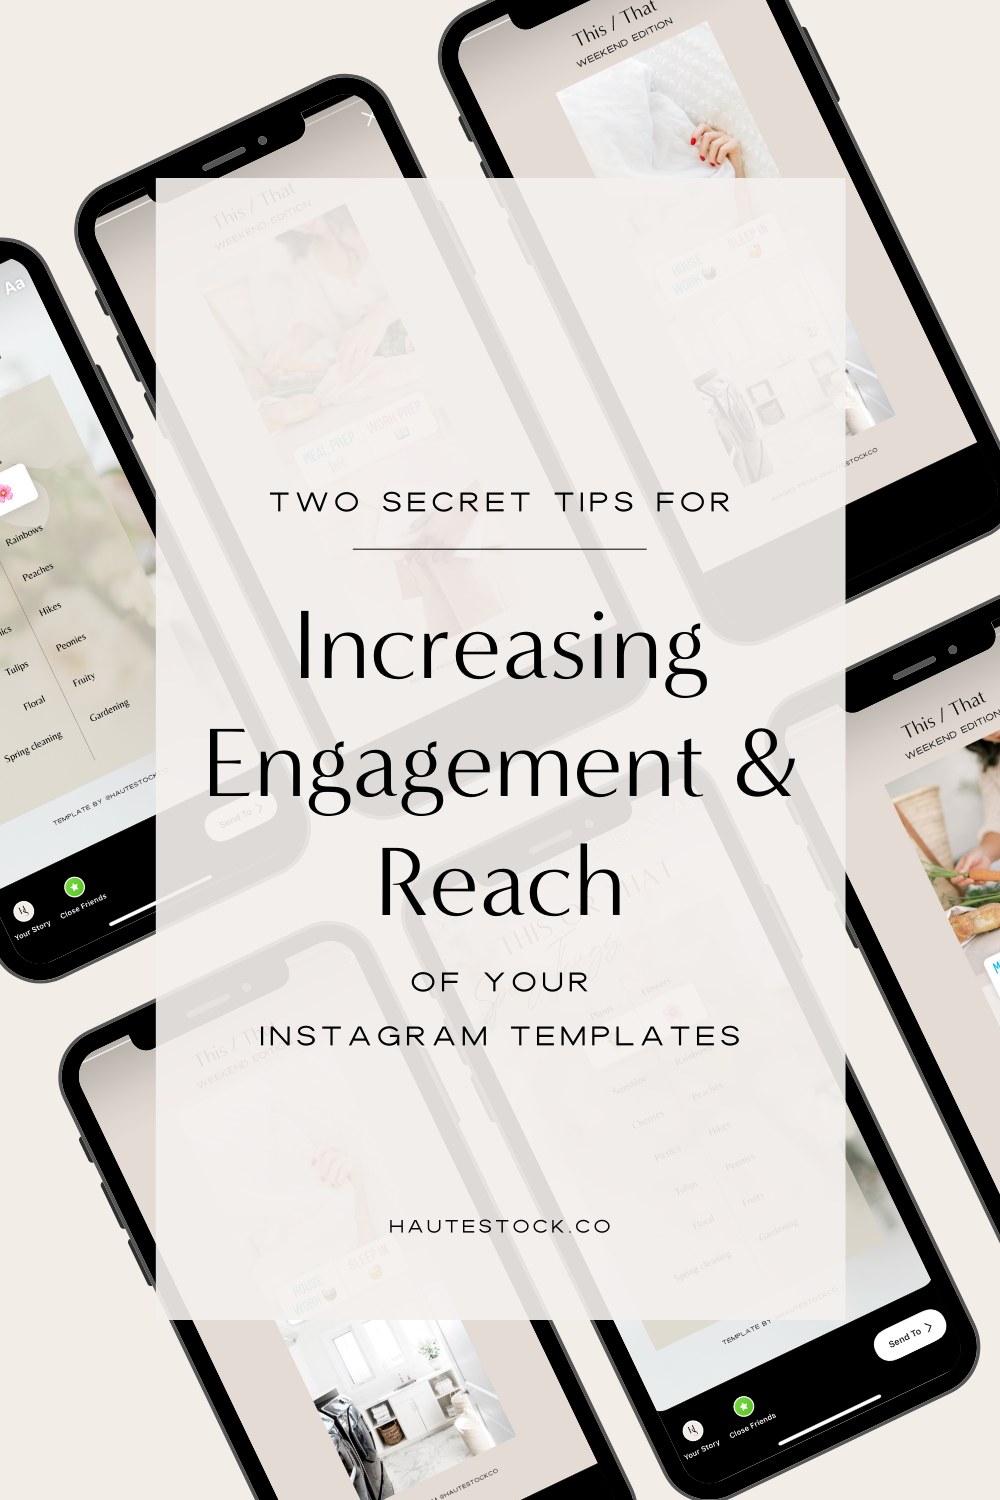 Two Secret Tips to Increasing Engagement & Reach of your Instagram Template (1).png